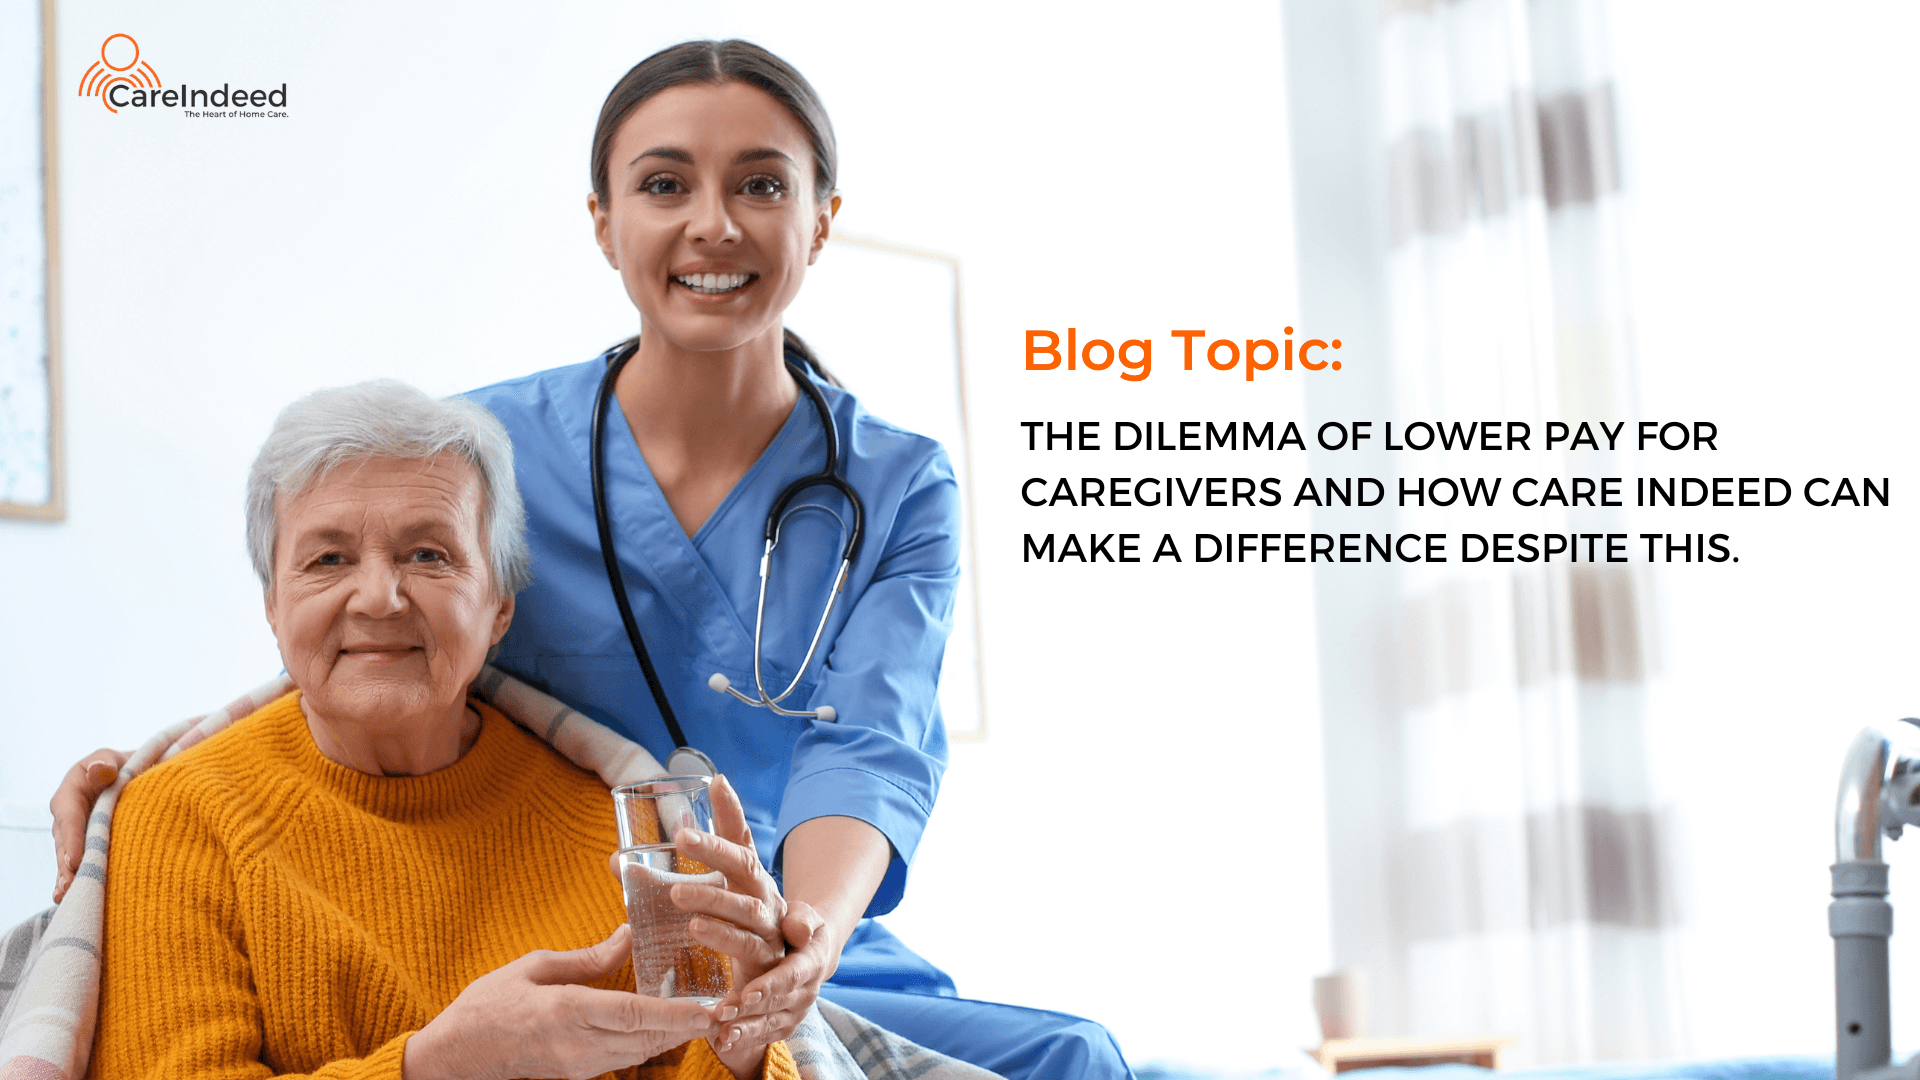 The Dilemma of Lower Pay for Caregivers and How Care Indeed can Make a Difference Despite This  banner image